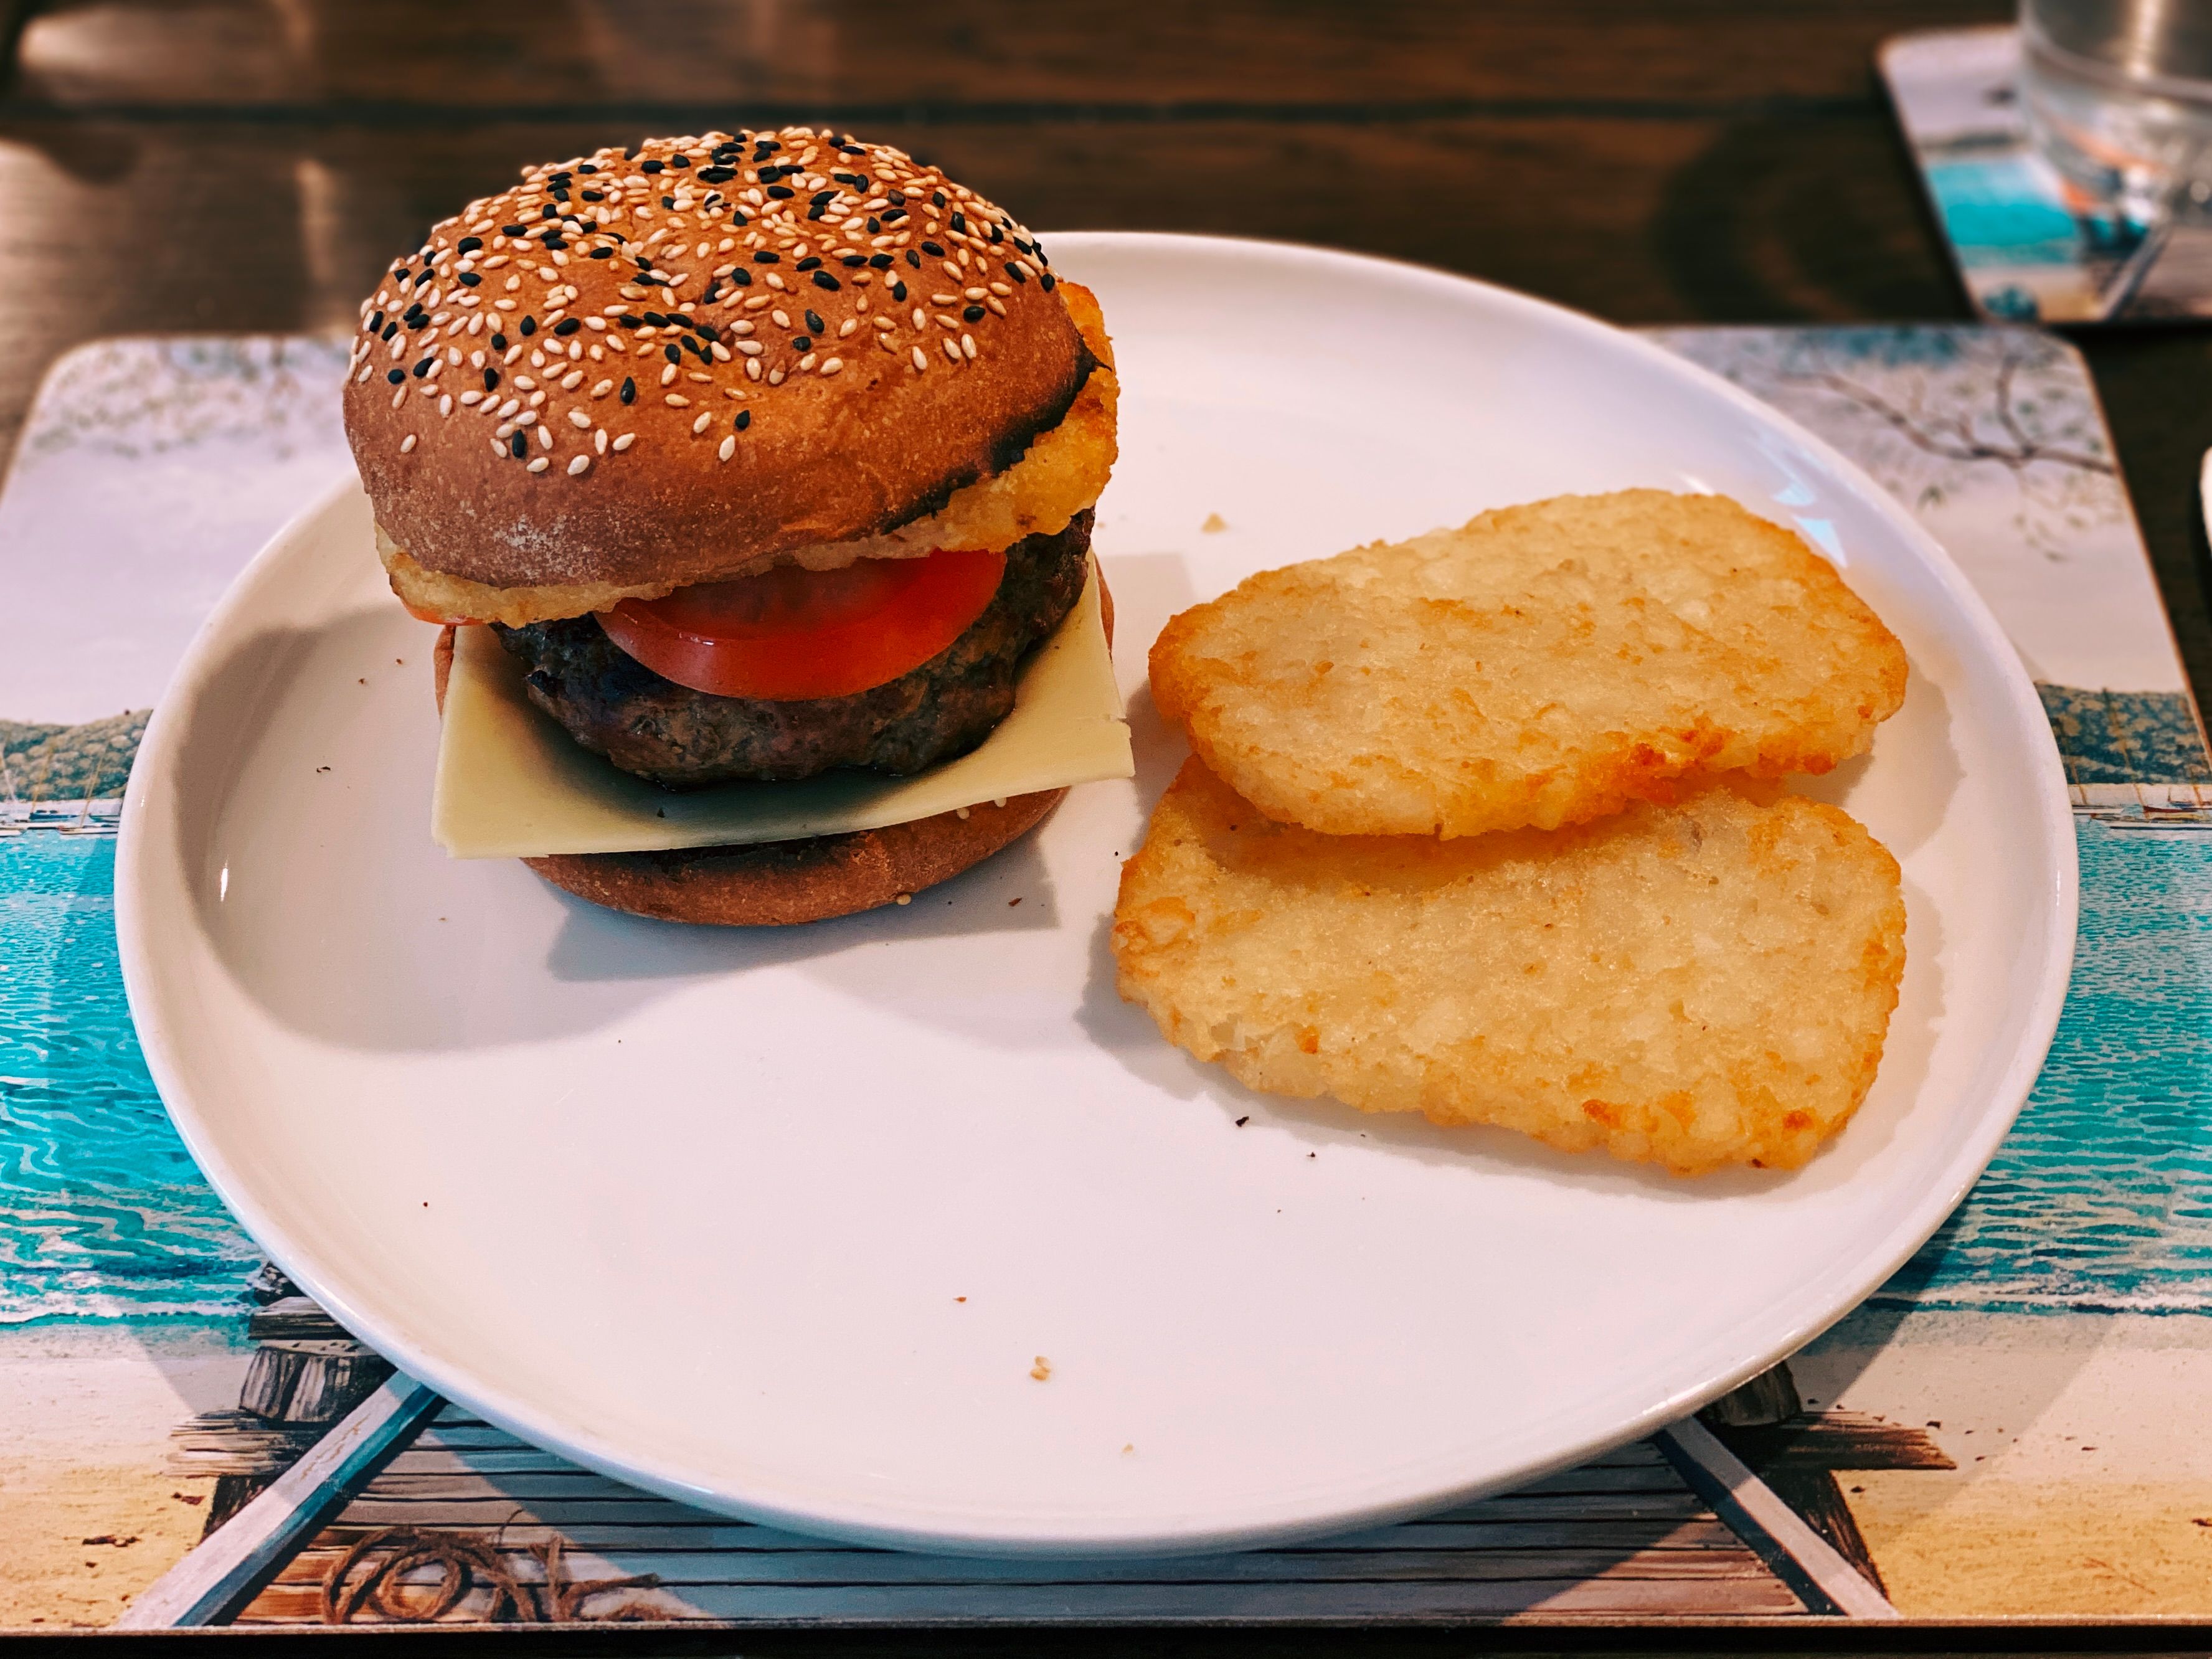 A photo of a beef burger on a plate along with two hash browns. The burger has ketchup, a slice of cheese, several slices of tomato, and one of the hash browns on it.